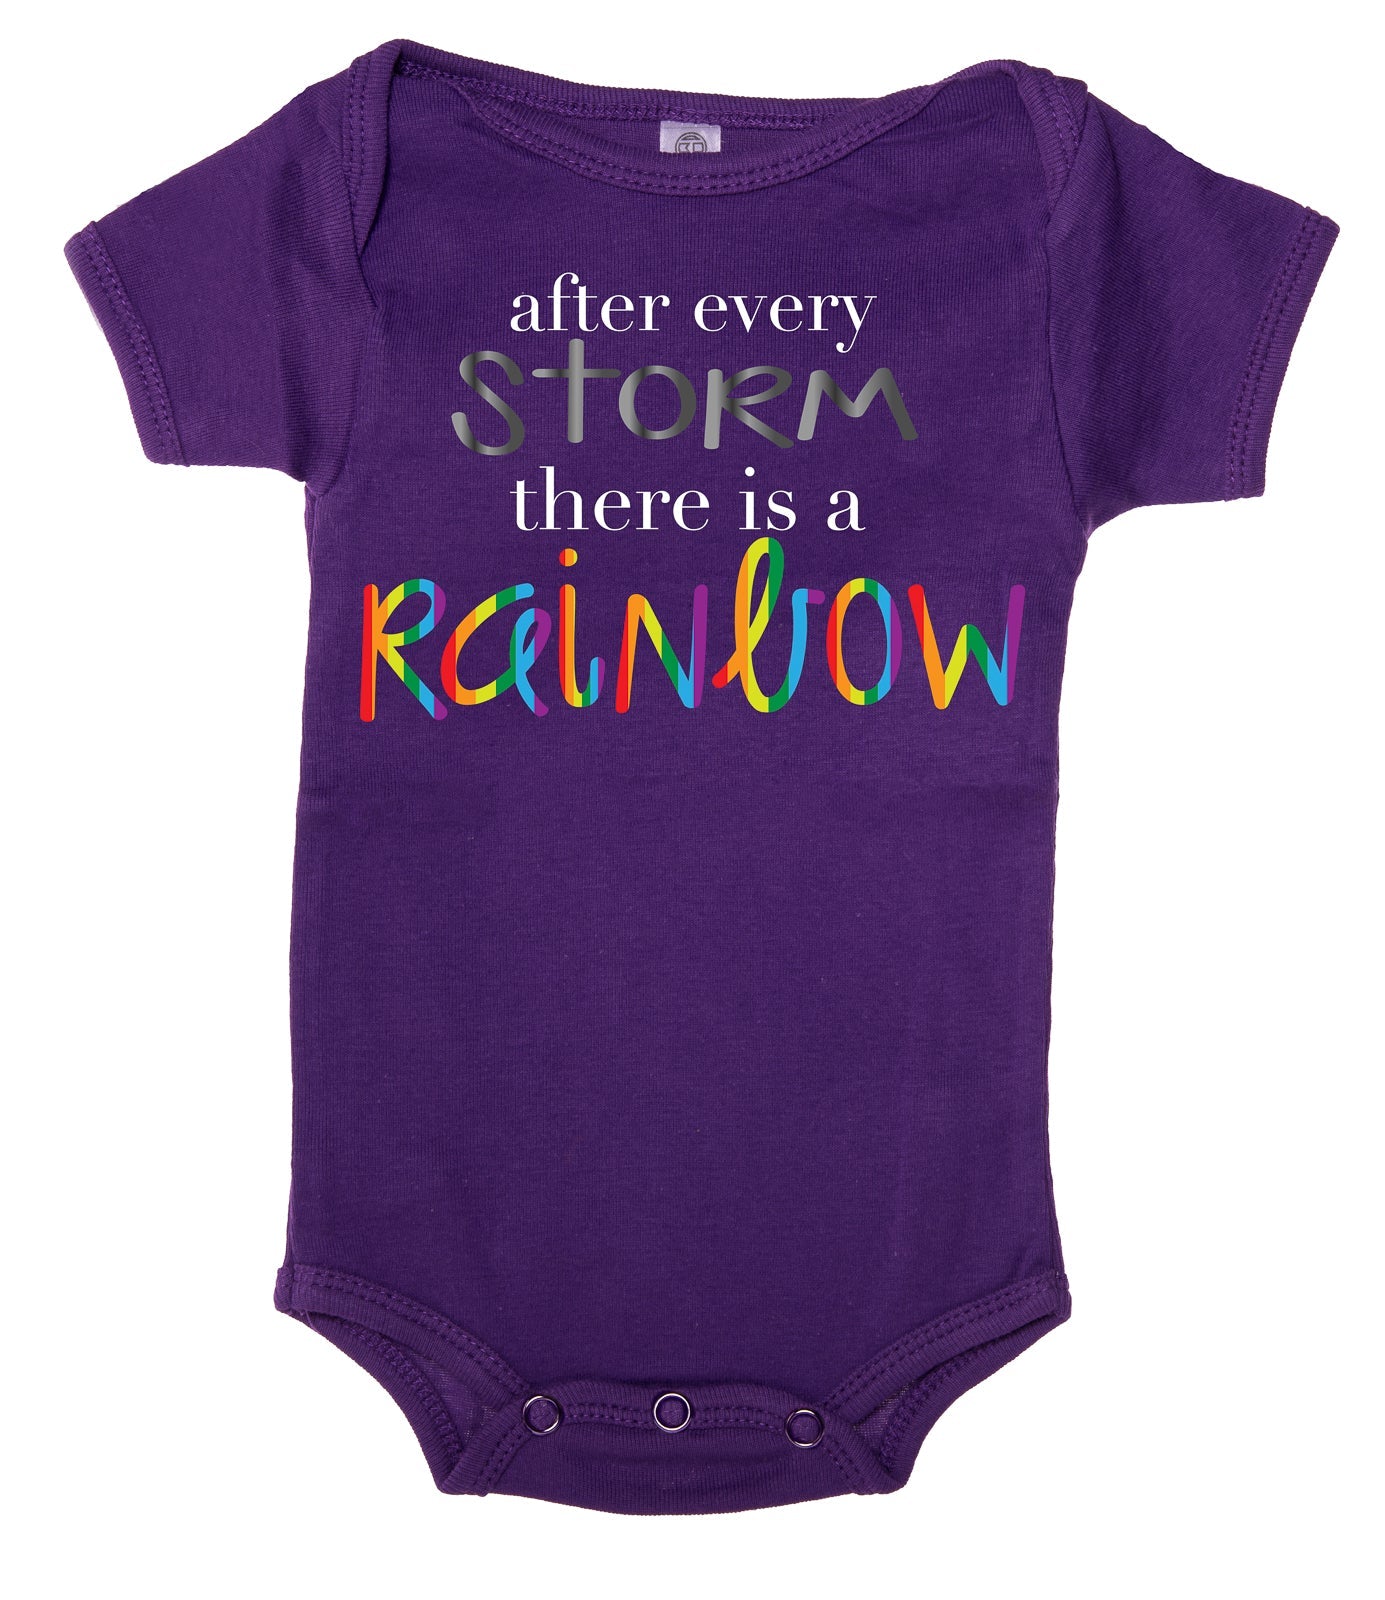 After Every Storm, There Is a Rainbow Cotton Baby Baby Romper - Mato & Hash